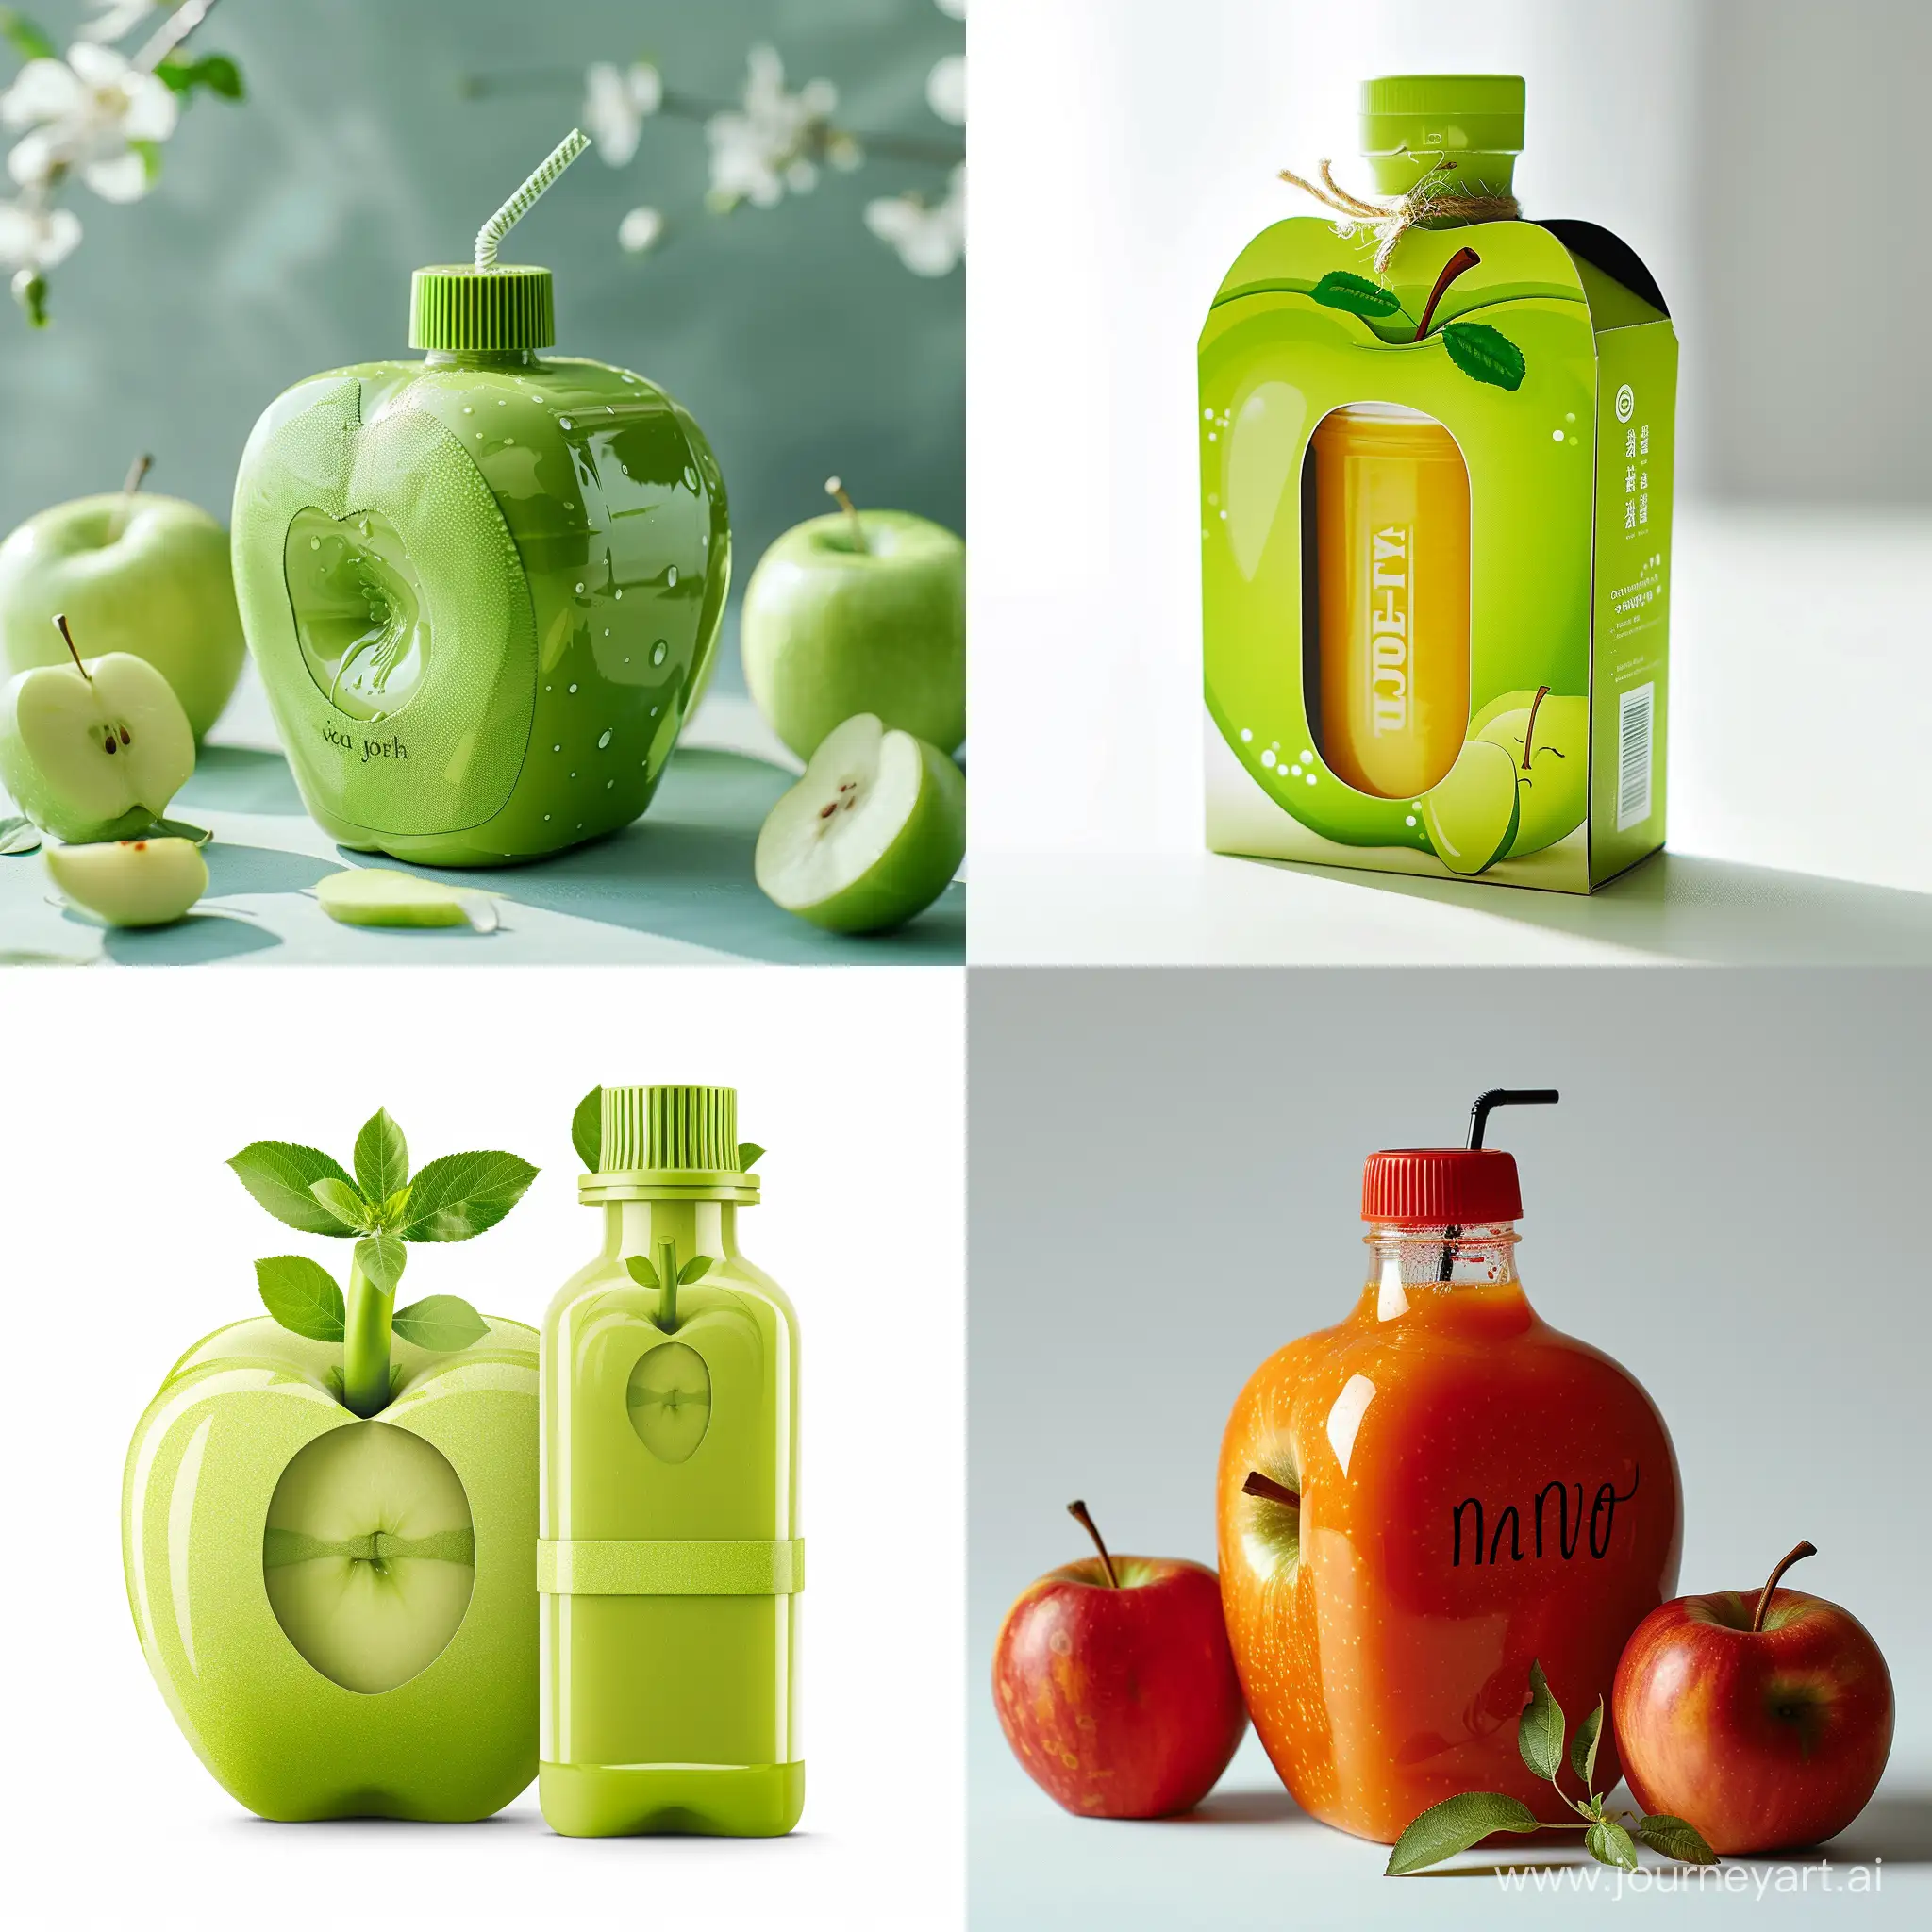 Vibrant-Commercial-Photography-Creative-Juice-Packaging-in-a-Big-Apple